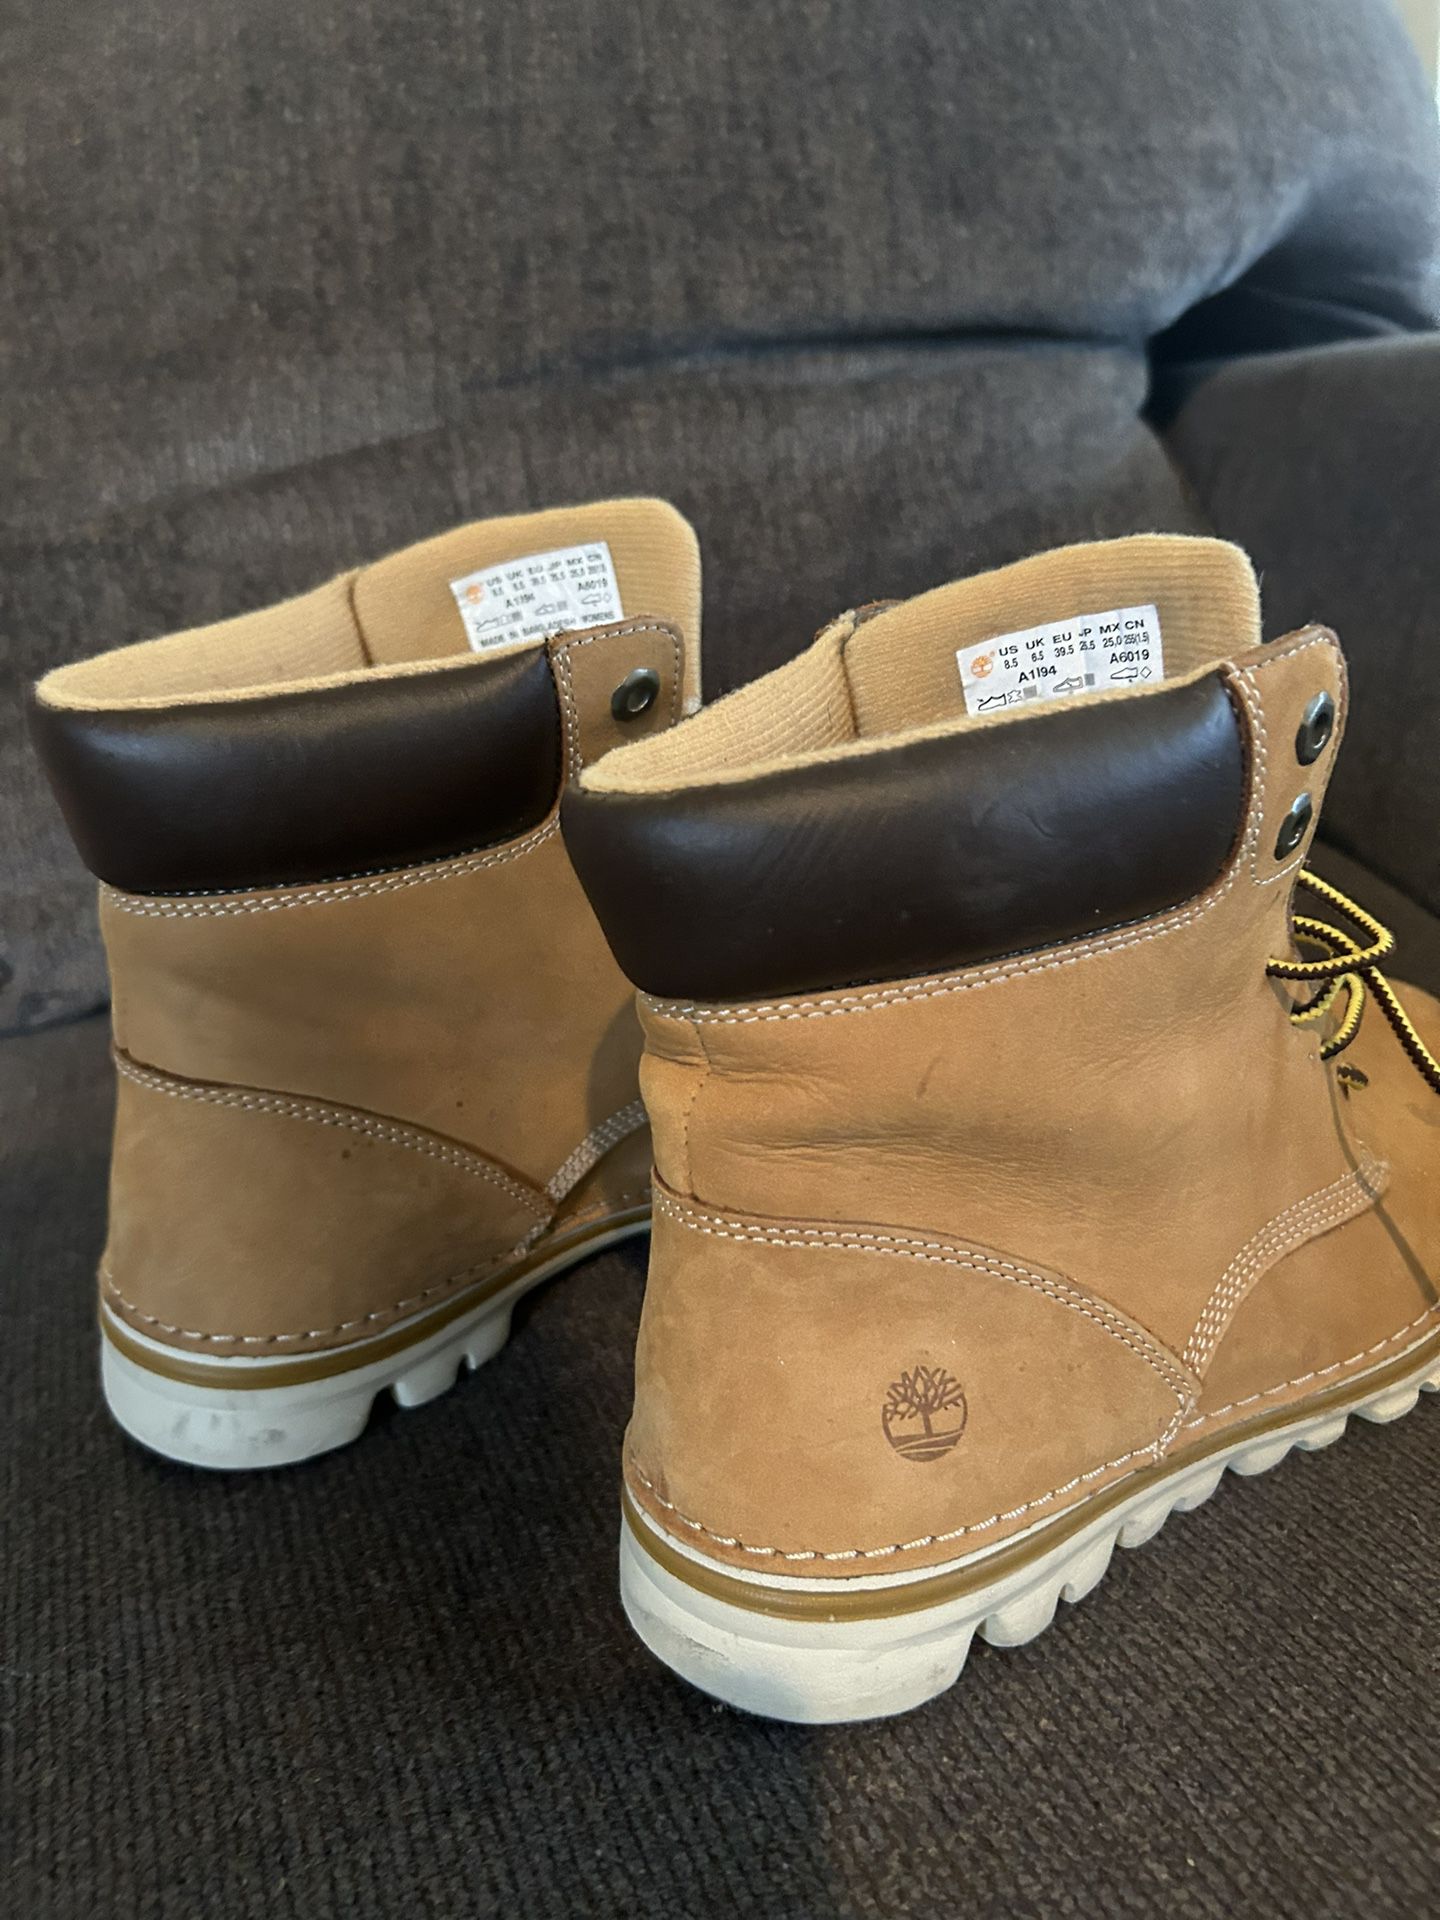 Timberland Snow Boot Unisex Size 8.5 